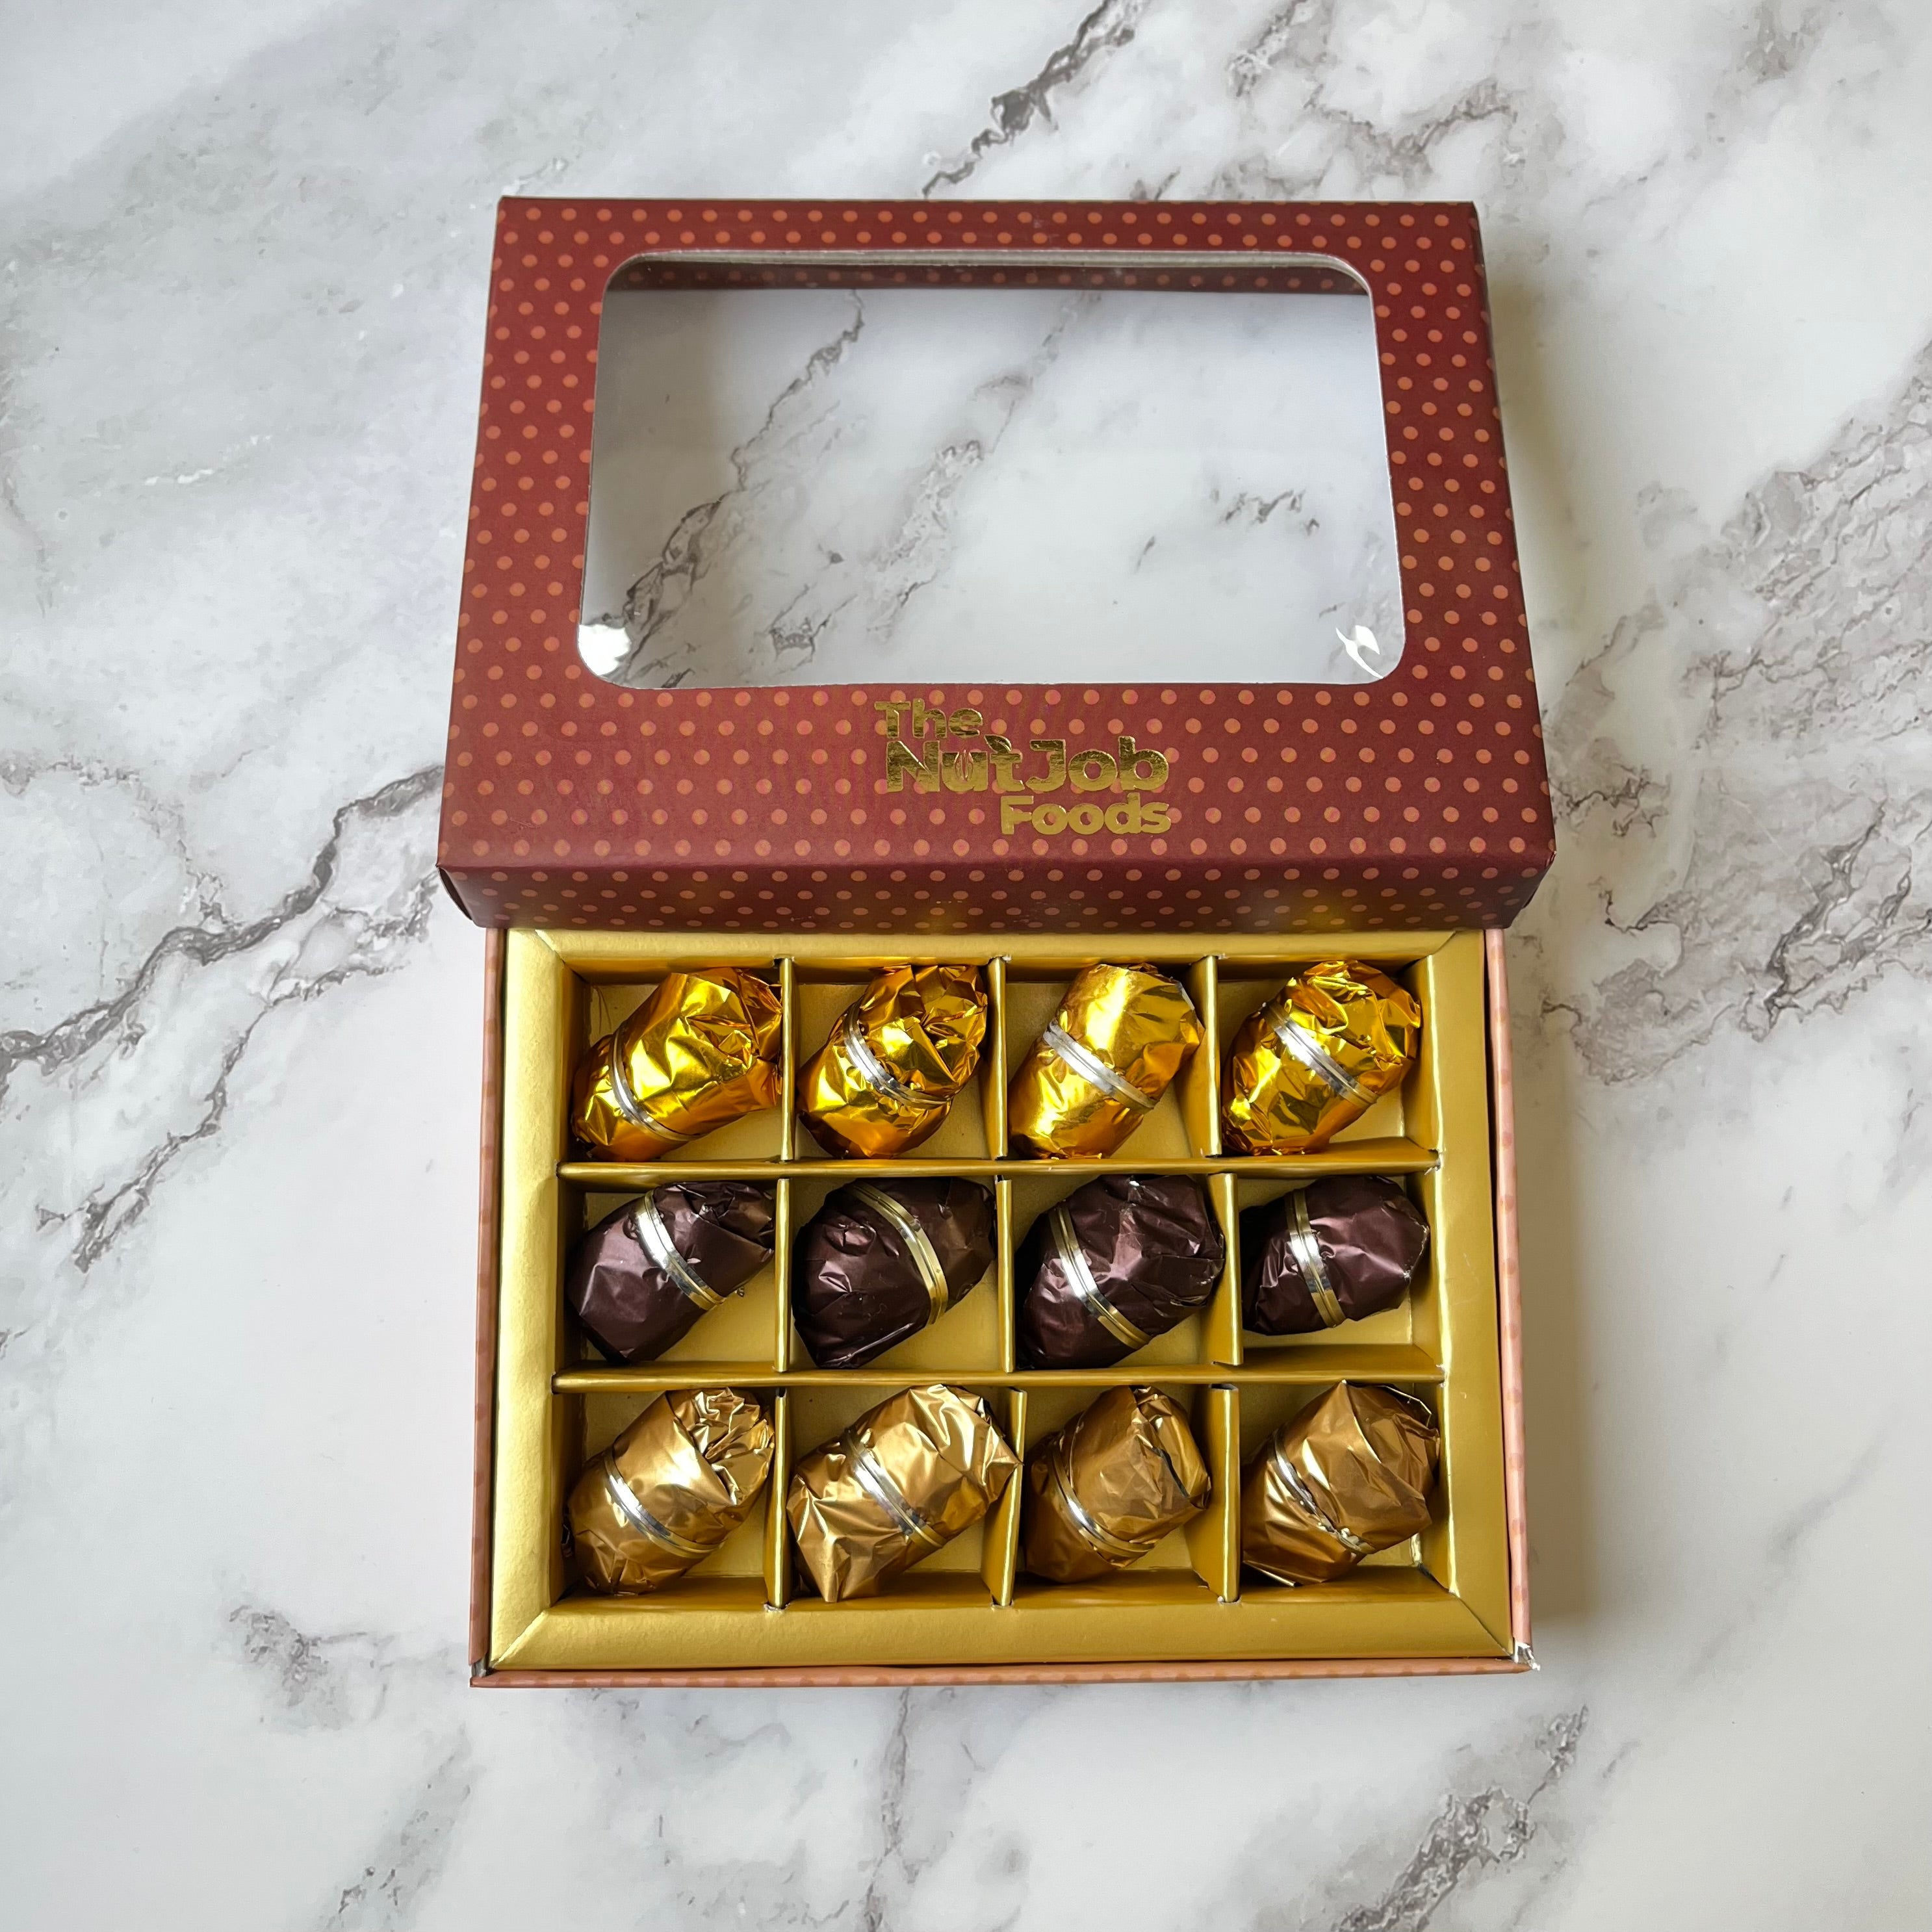 Expelite Congratulations Chocolate Gift Box 400gm Online in India, Buy at  Best Price from Firstcry.com - 9788589